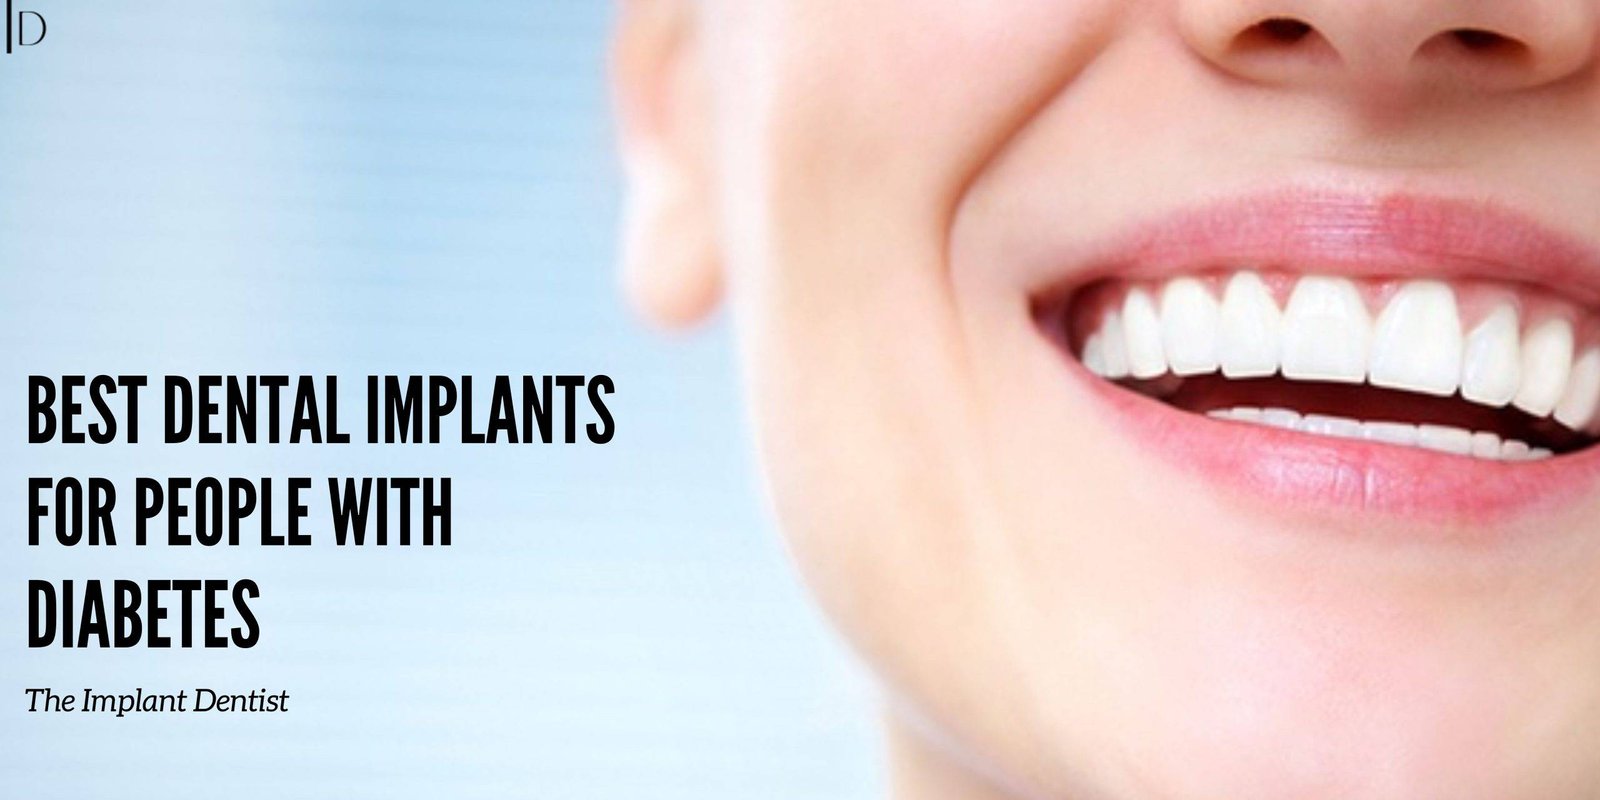 The Best Dental Implants for People with Diabetes